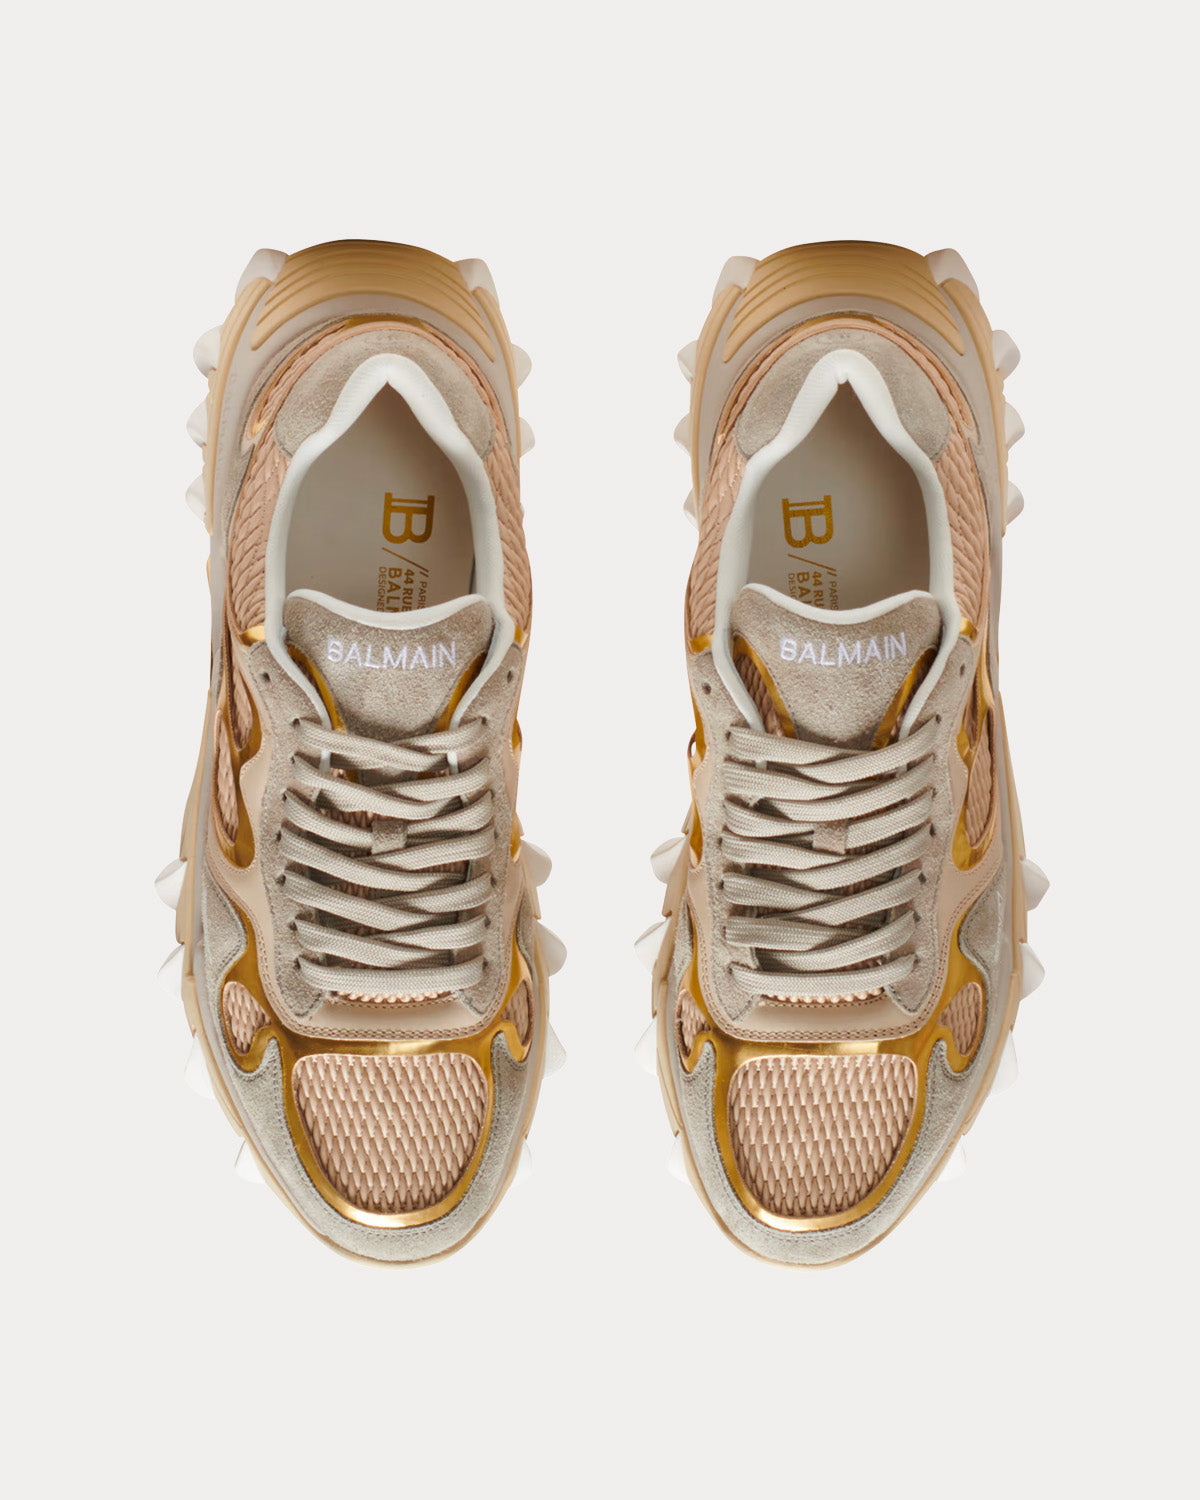 Balmain - B-East Leather, Suede & Mesh Gold Low Top Sneakers